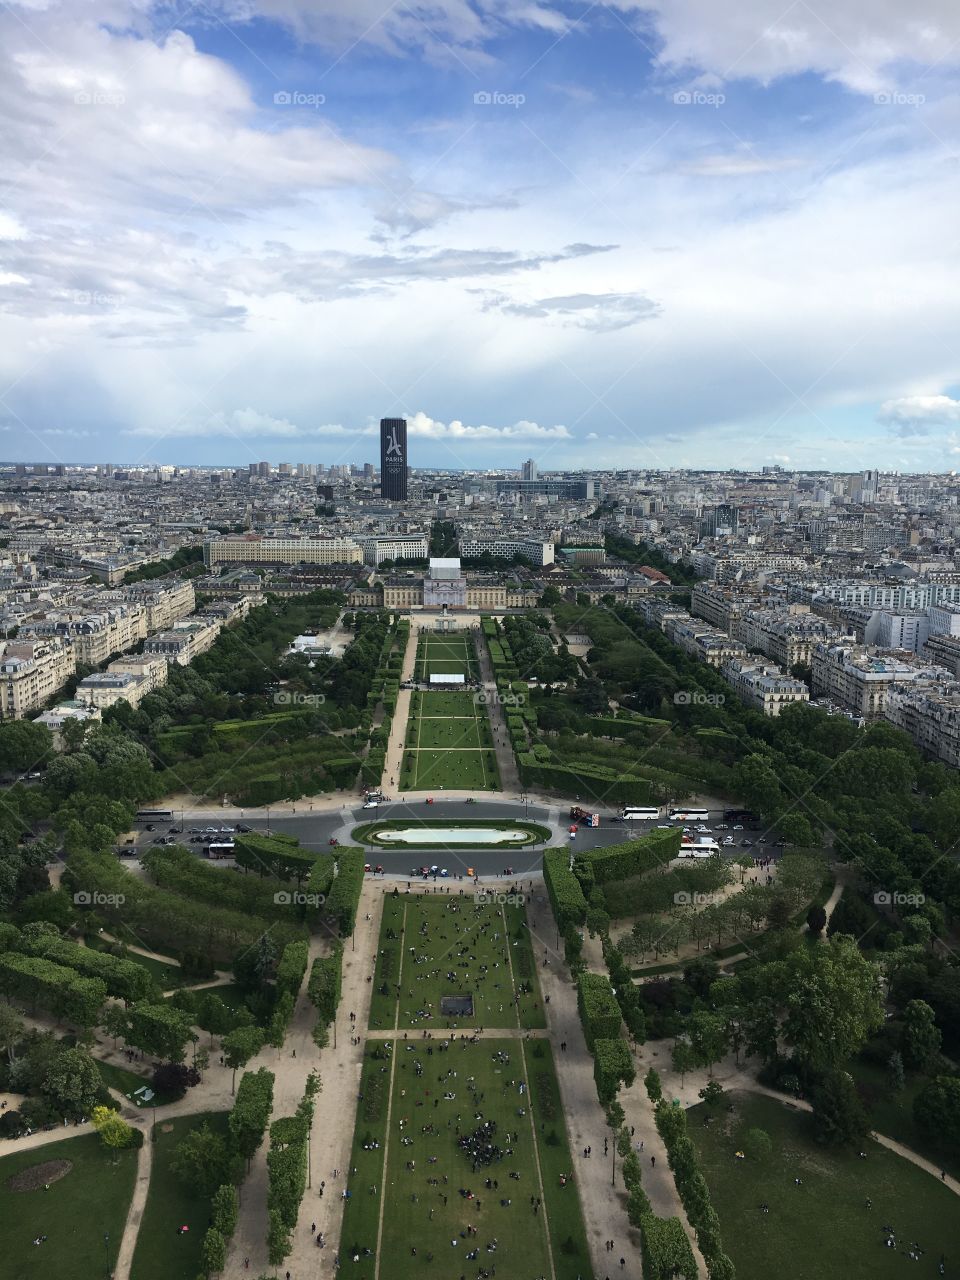 Top of Eiffel Tower, over looking Paris, France